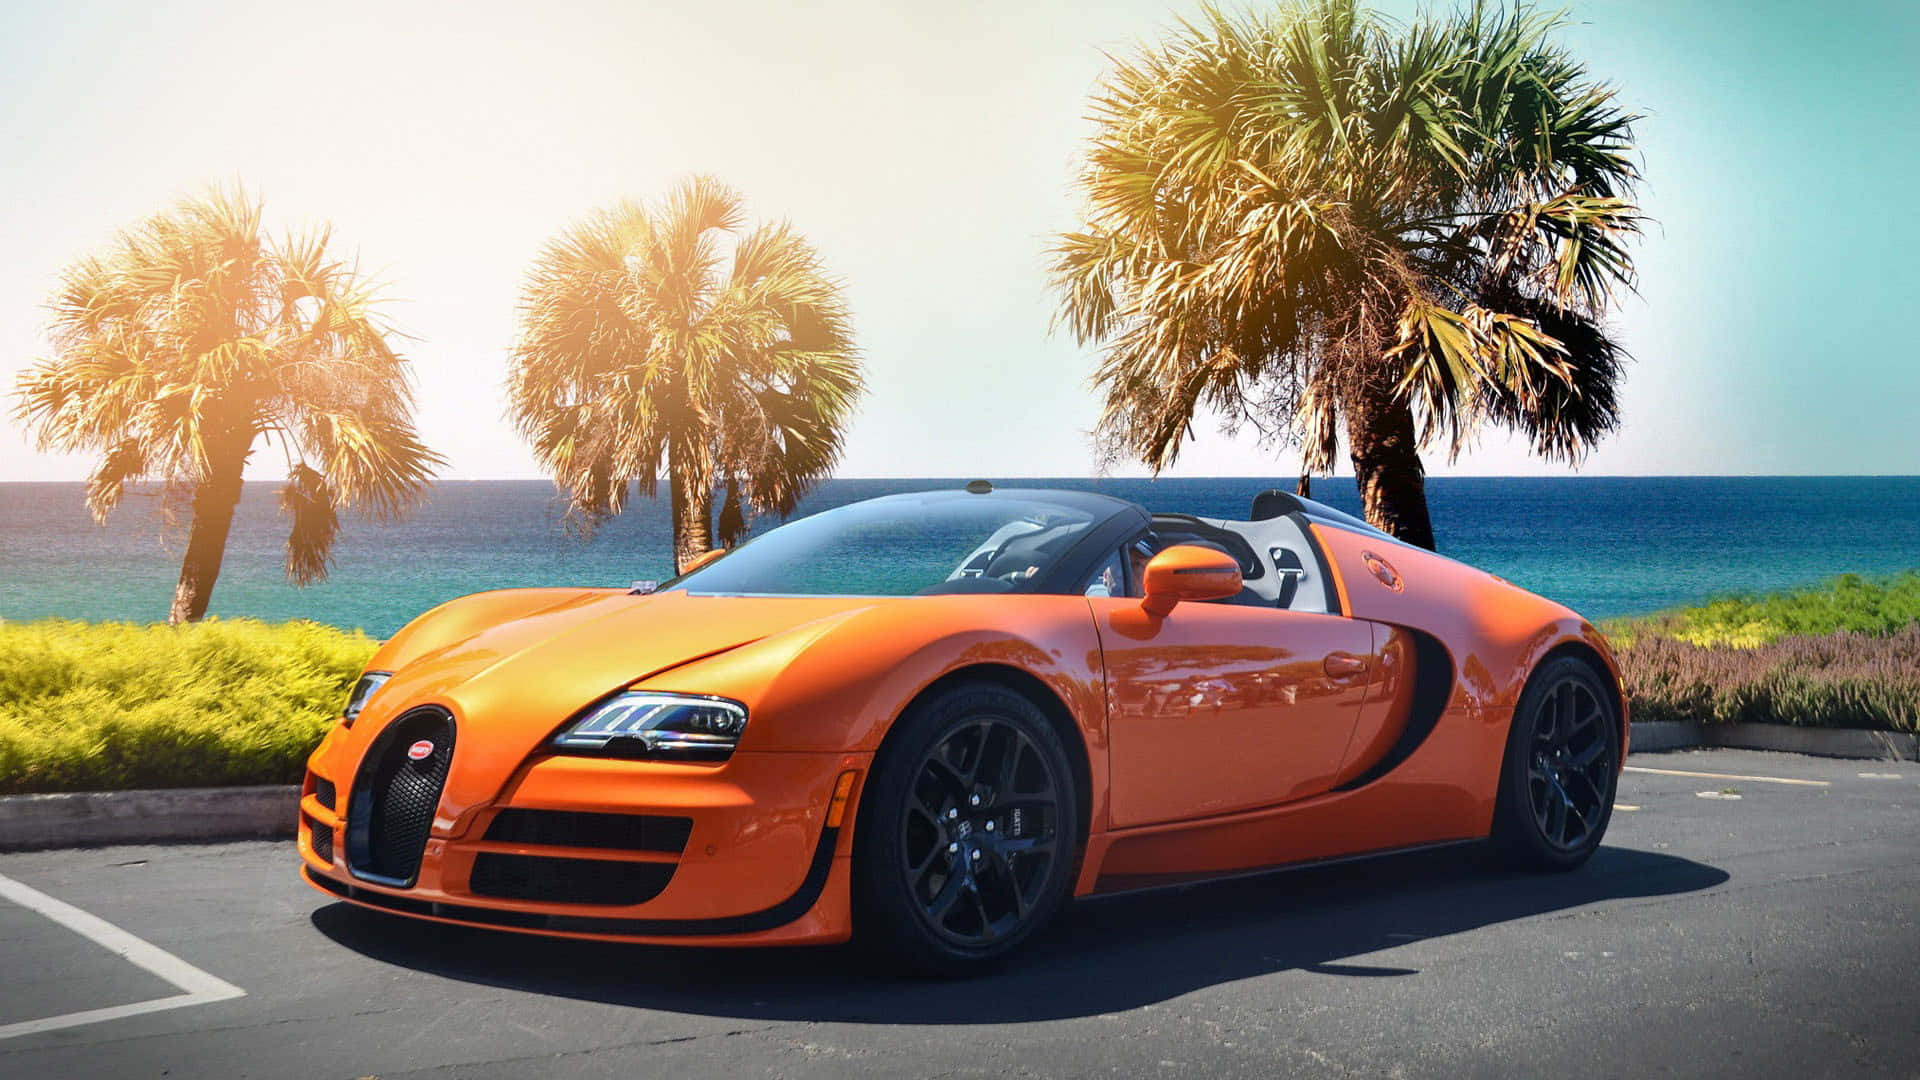 “A Symbol of Speed and Style: The Bugatti Car” Wallpaper